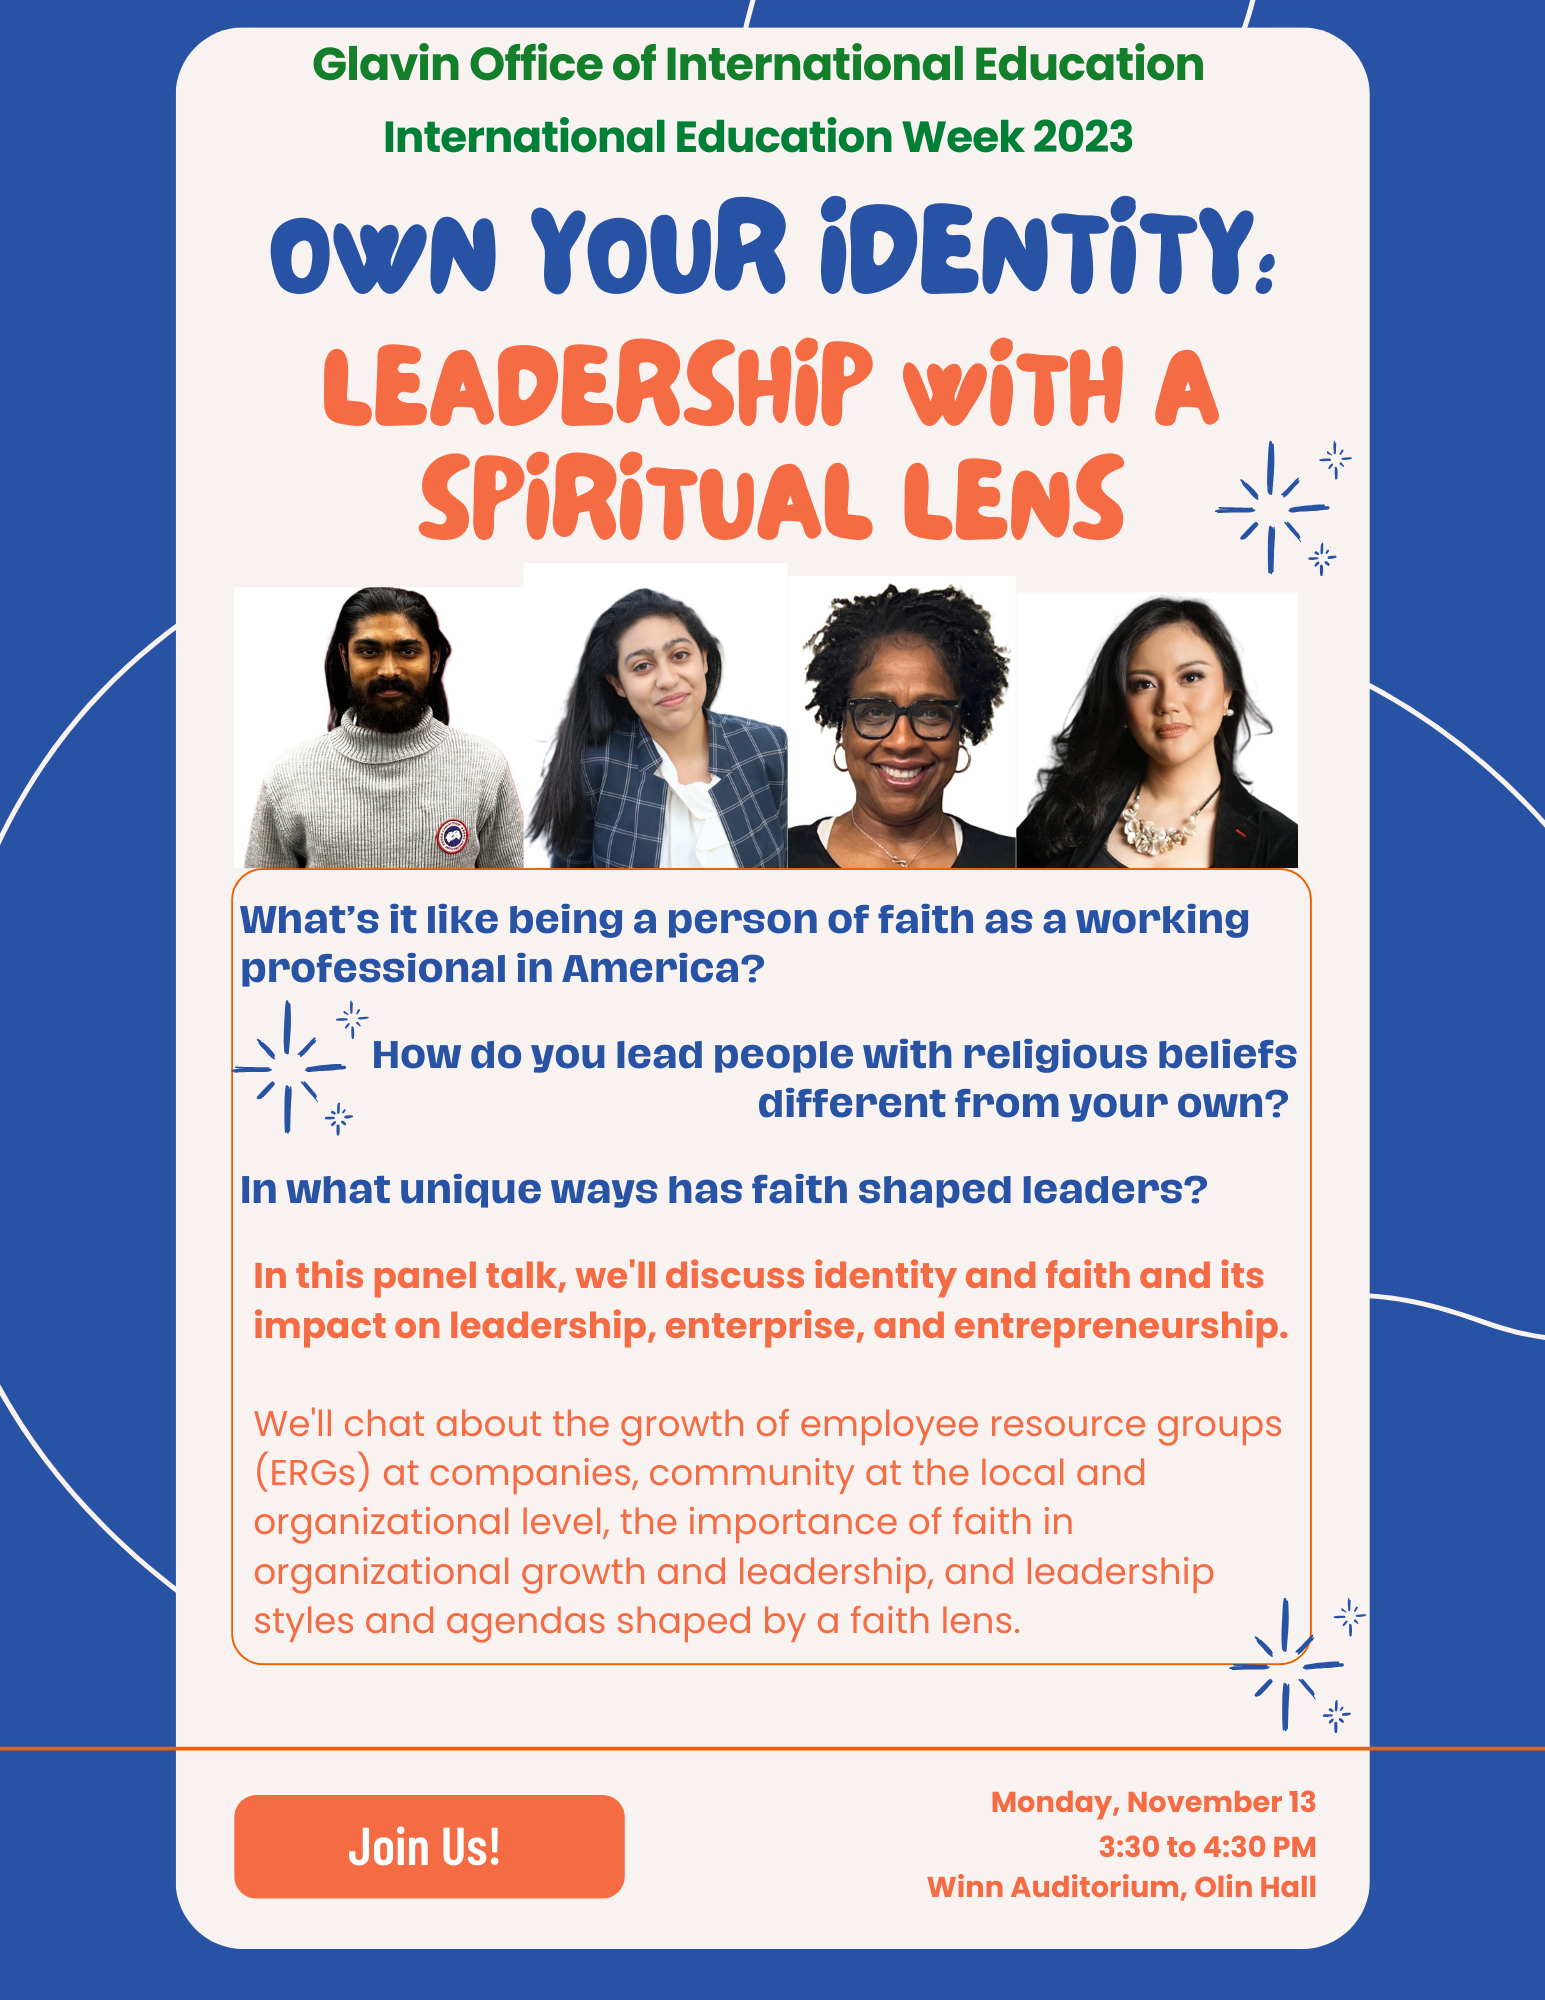 Session flyer for Own Your Identity: Leadership with a Spiritual Lens